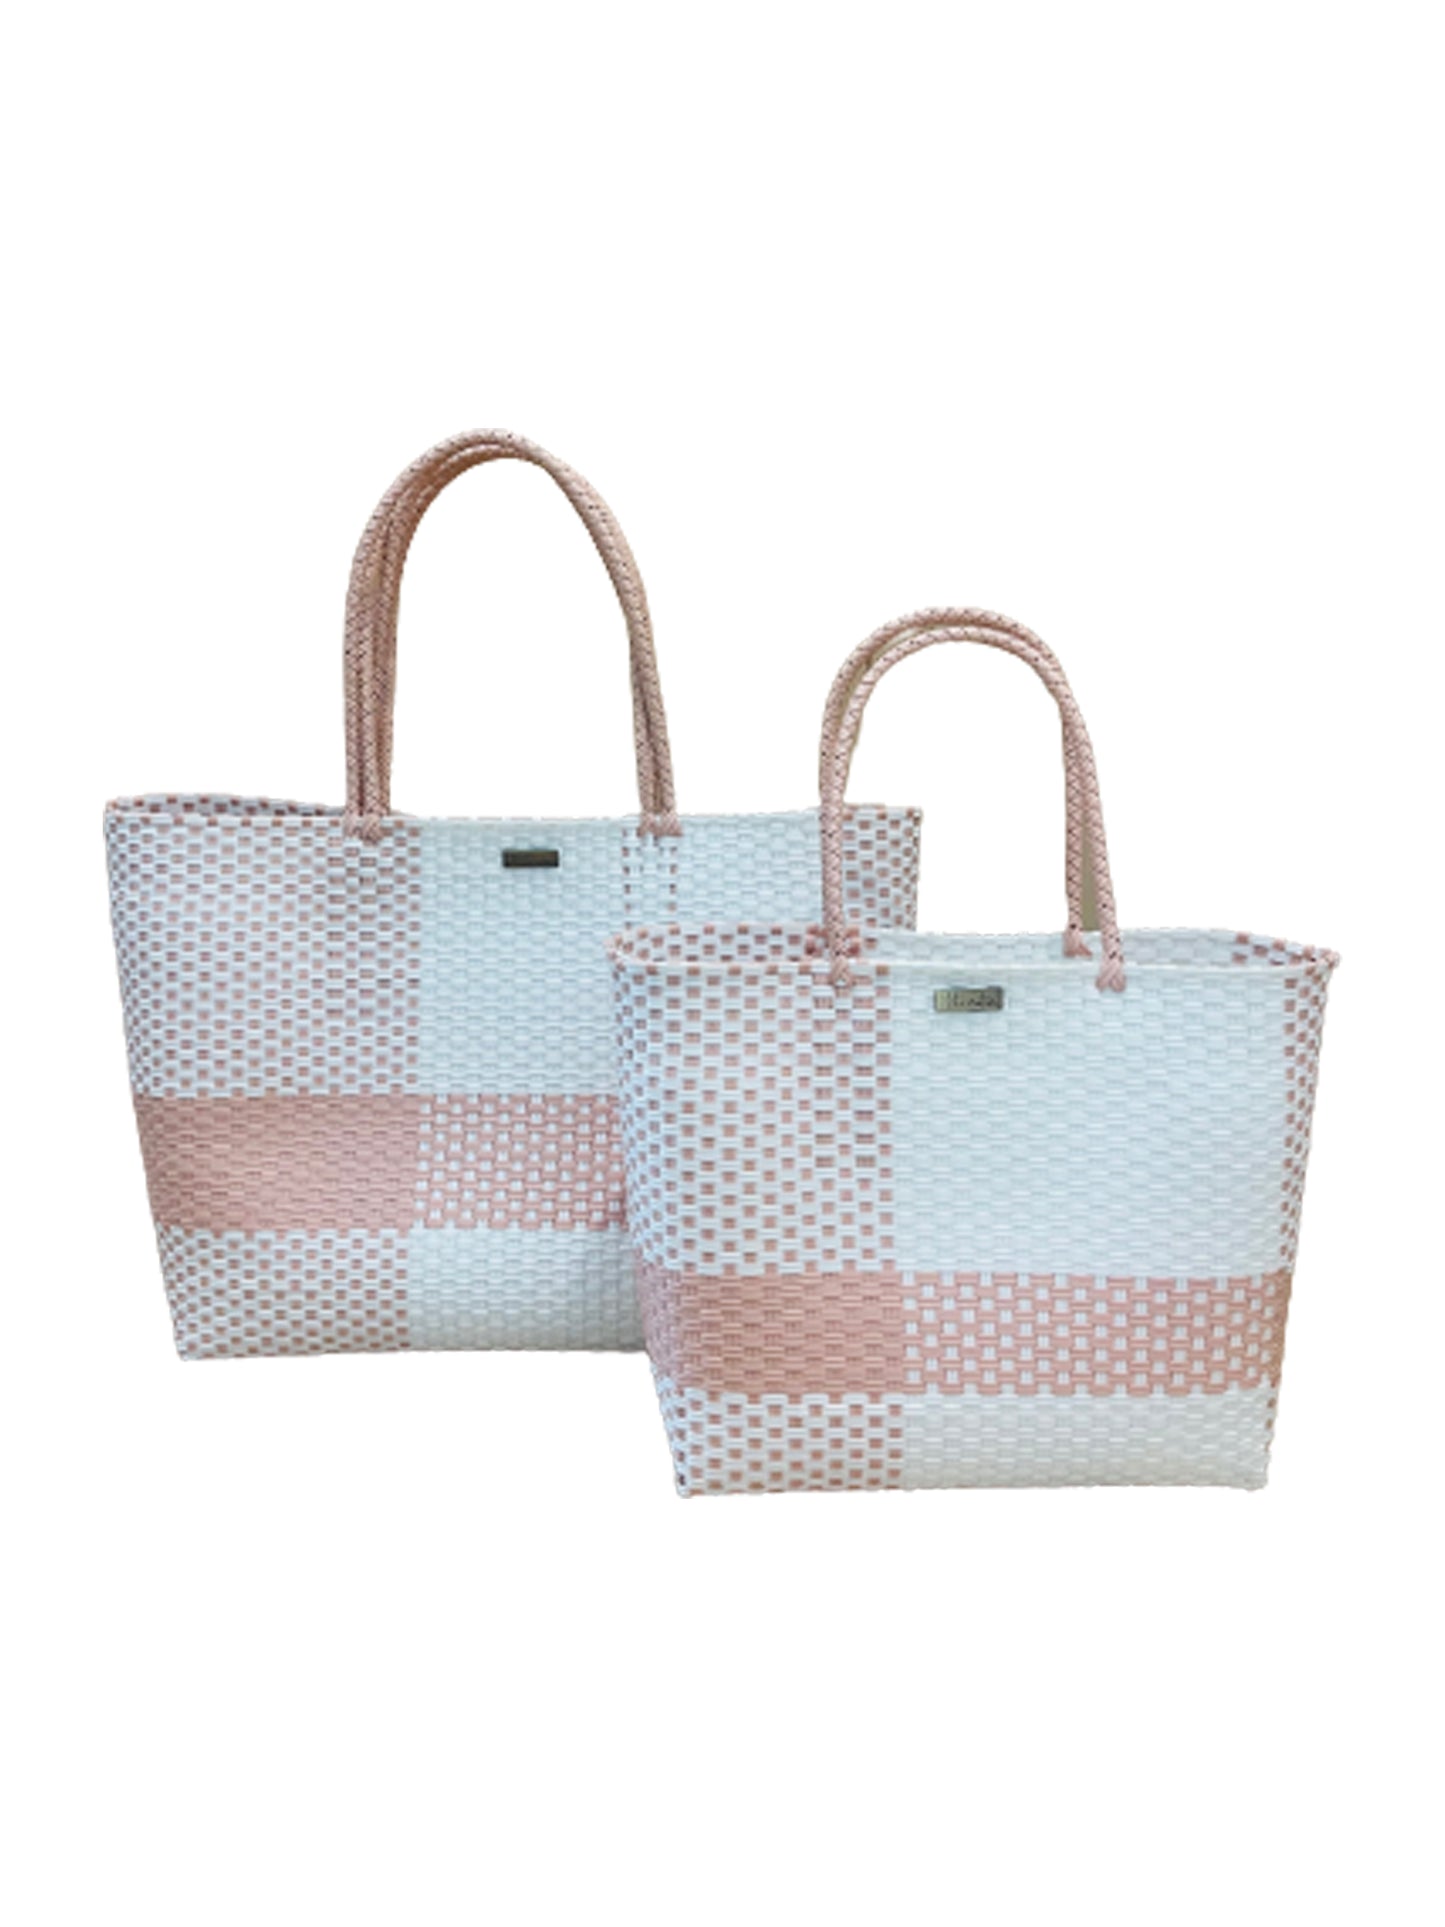 playa tote small and large pink and white